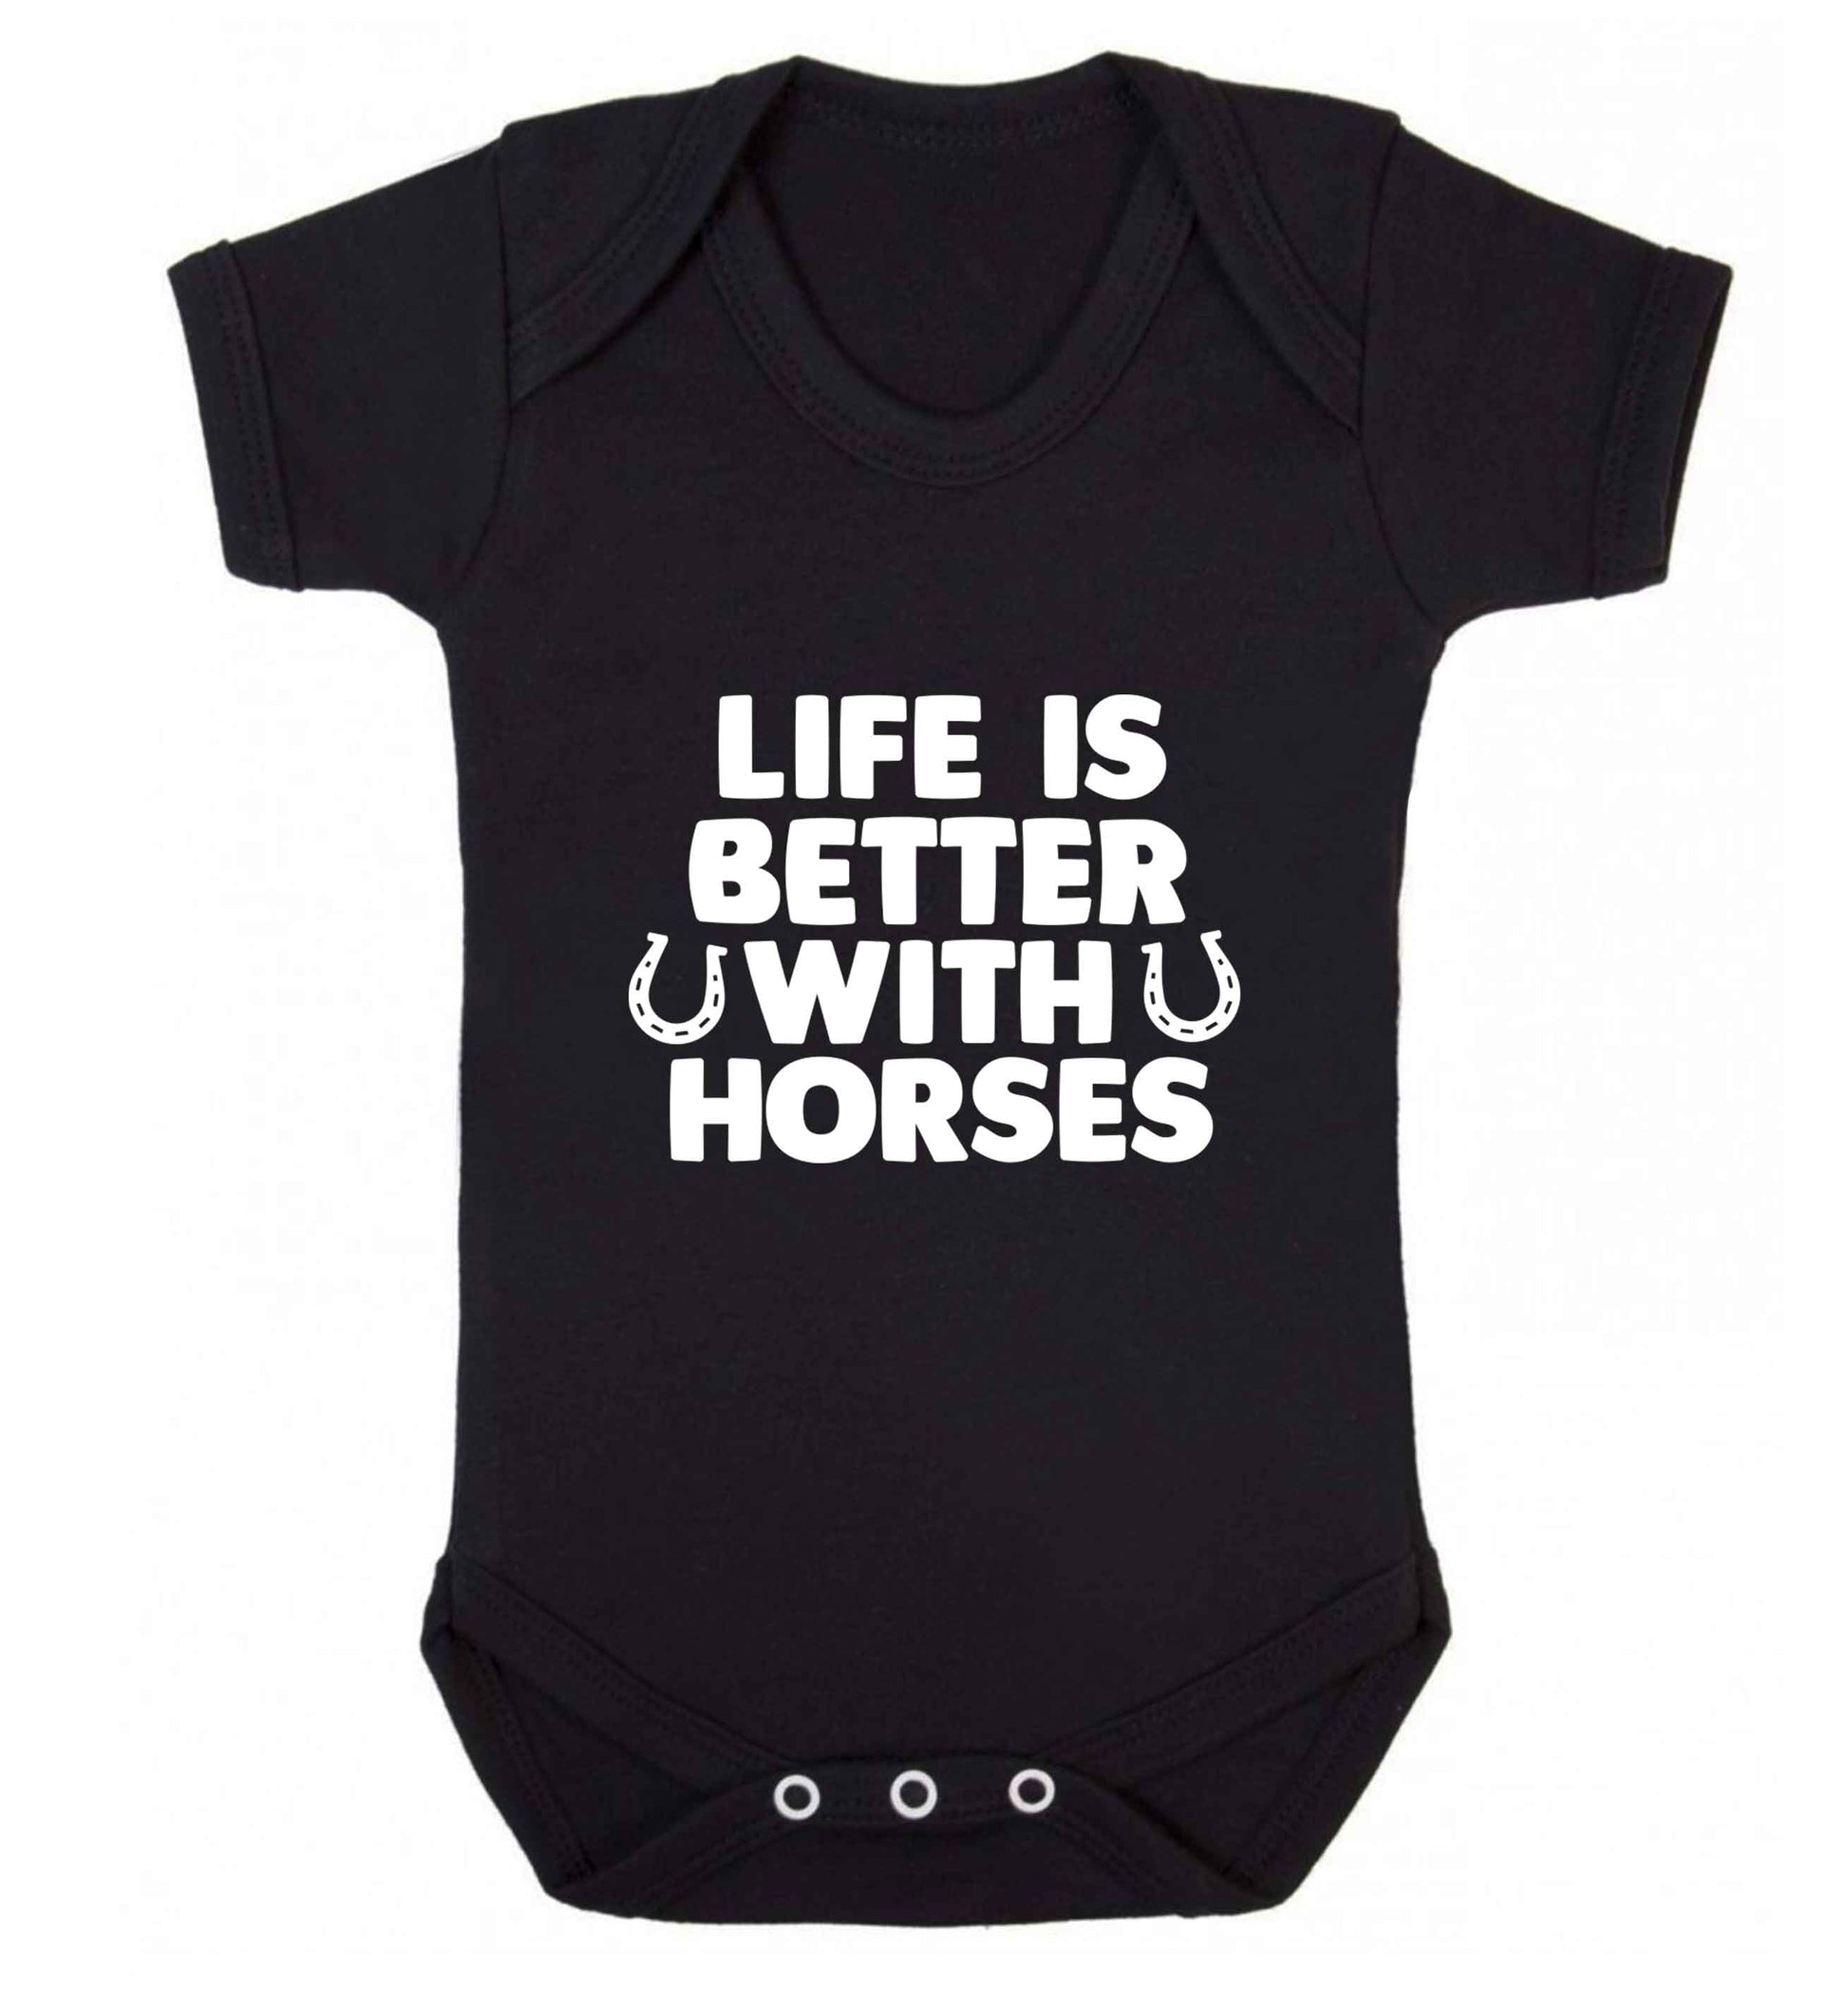 Life is better with horses baby vest black 18-24 months